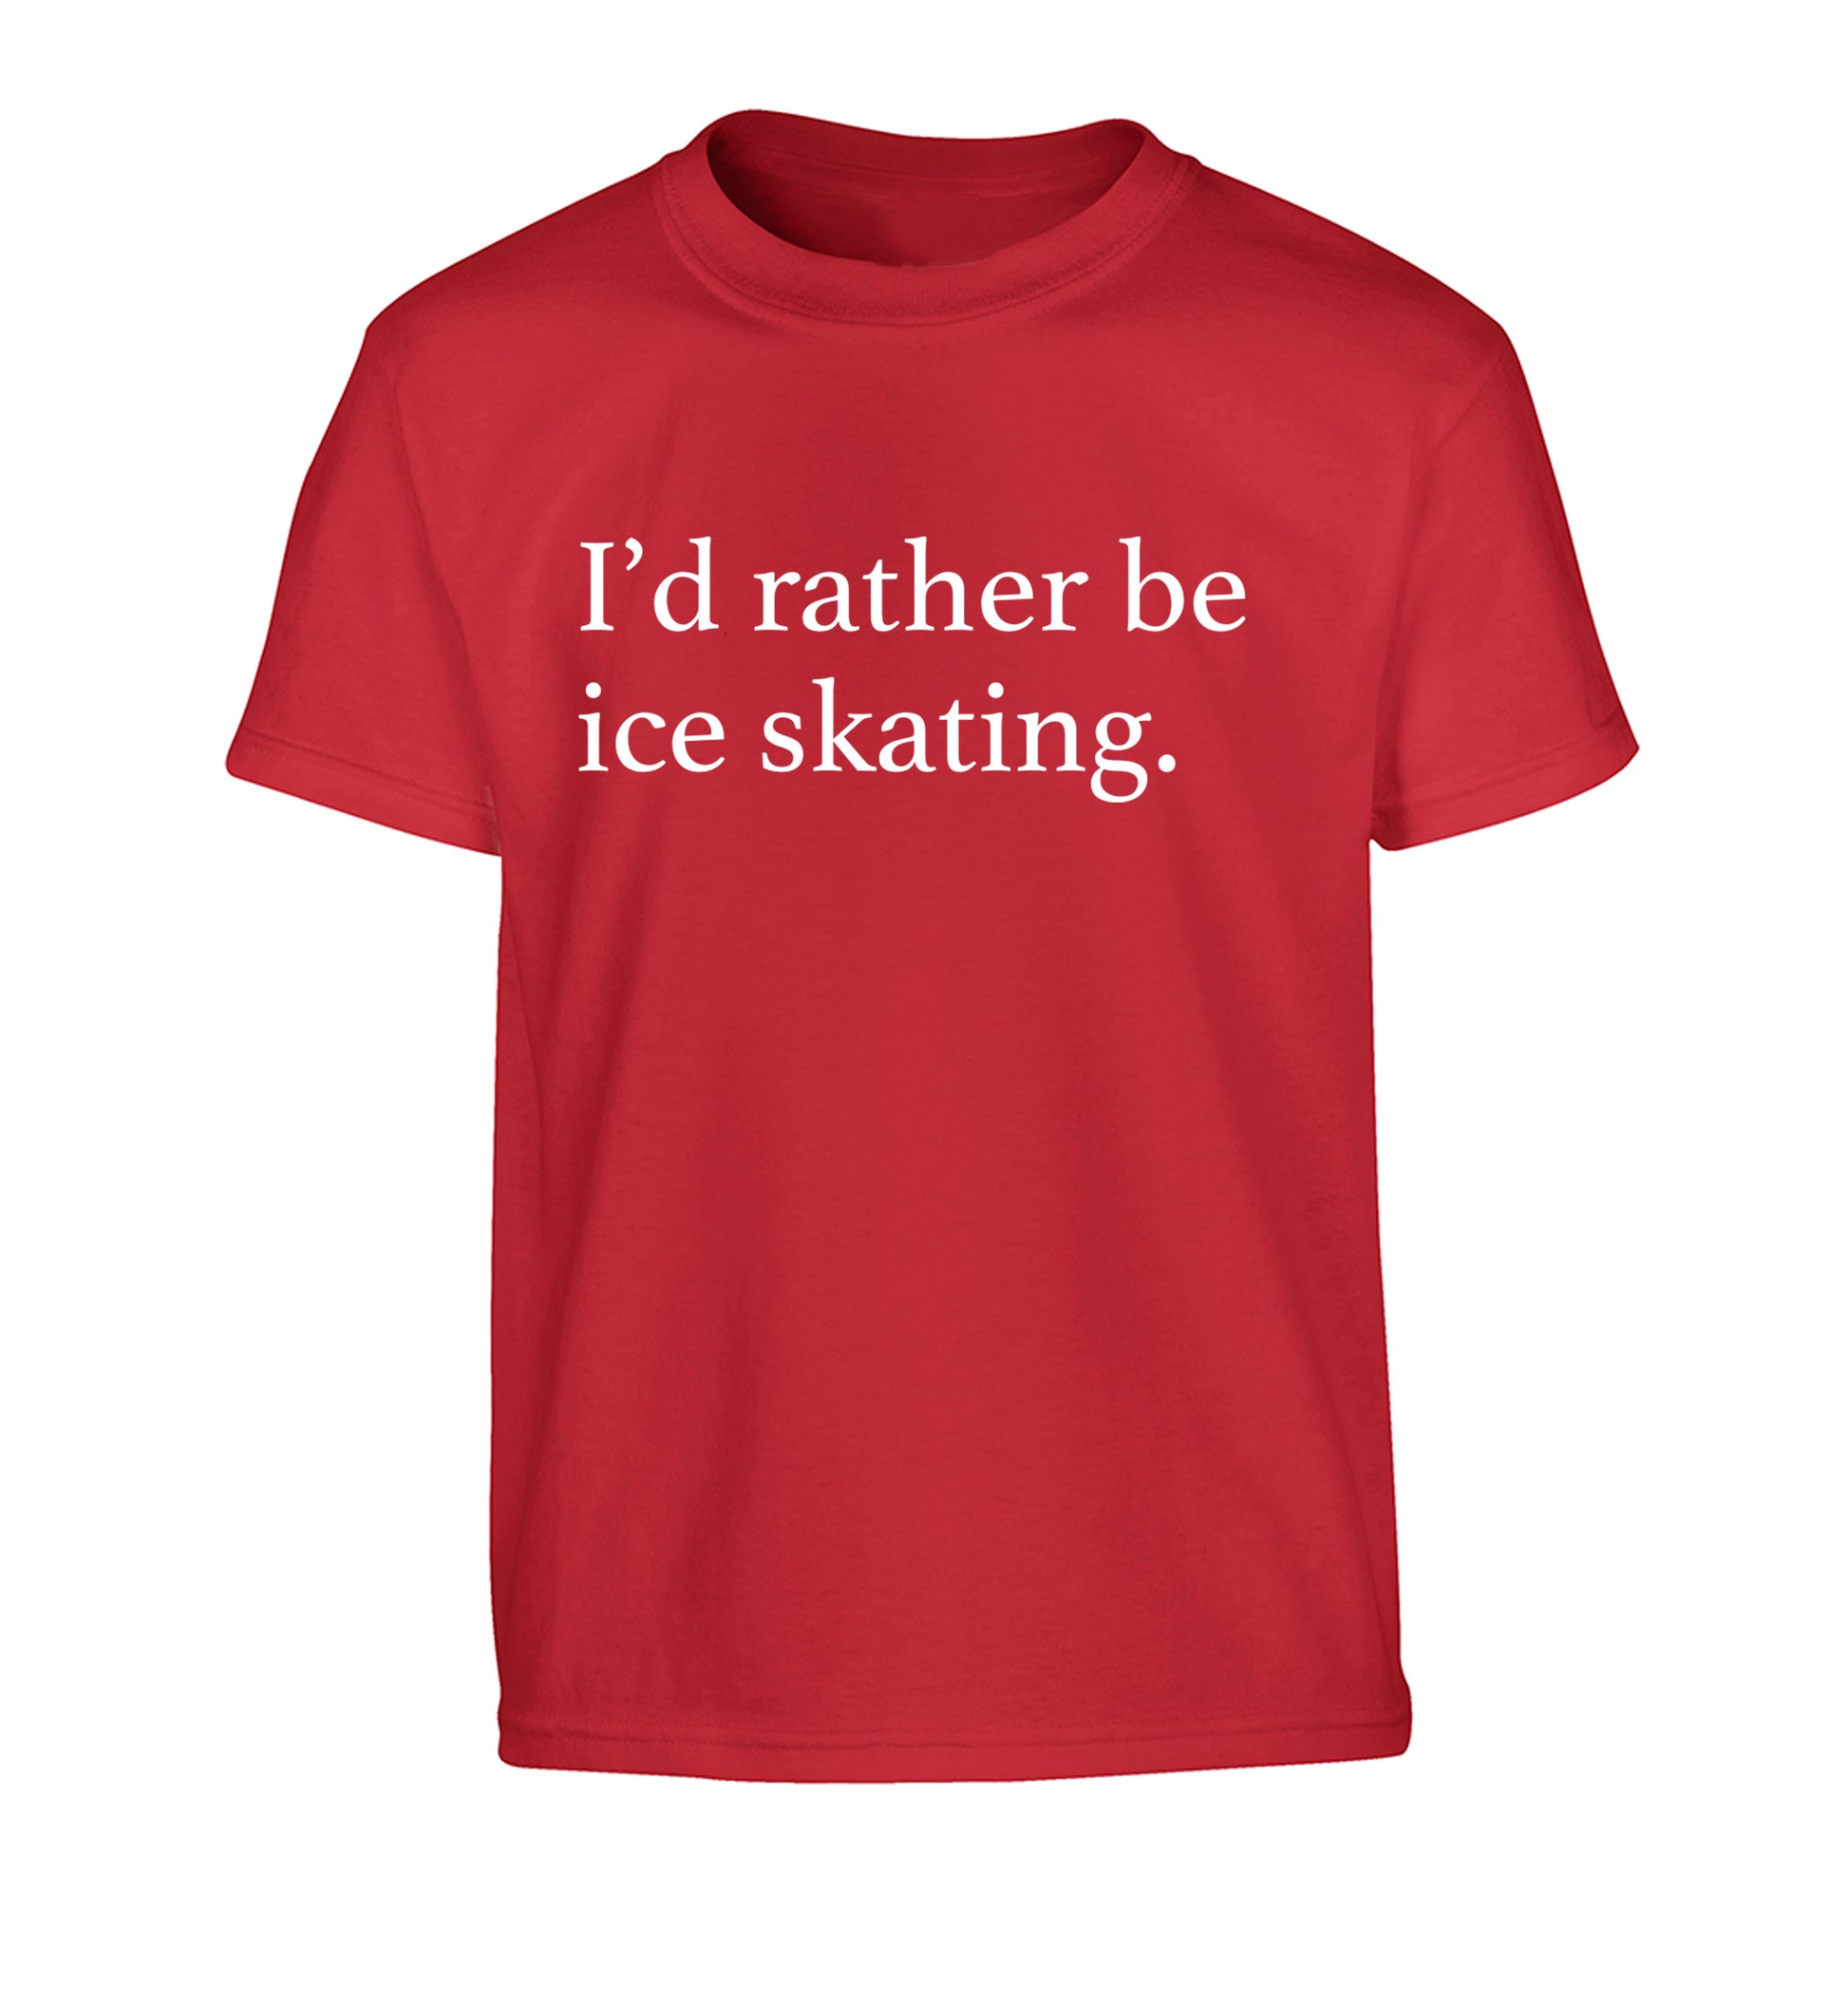 I'd rather be ice skating Children's red Tshirt 12-14 Years